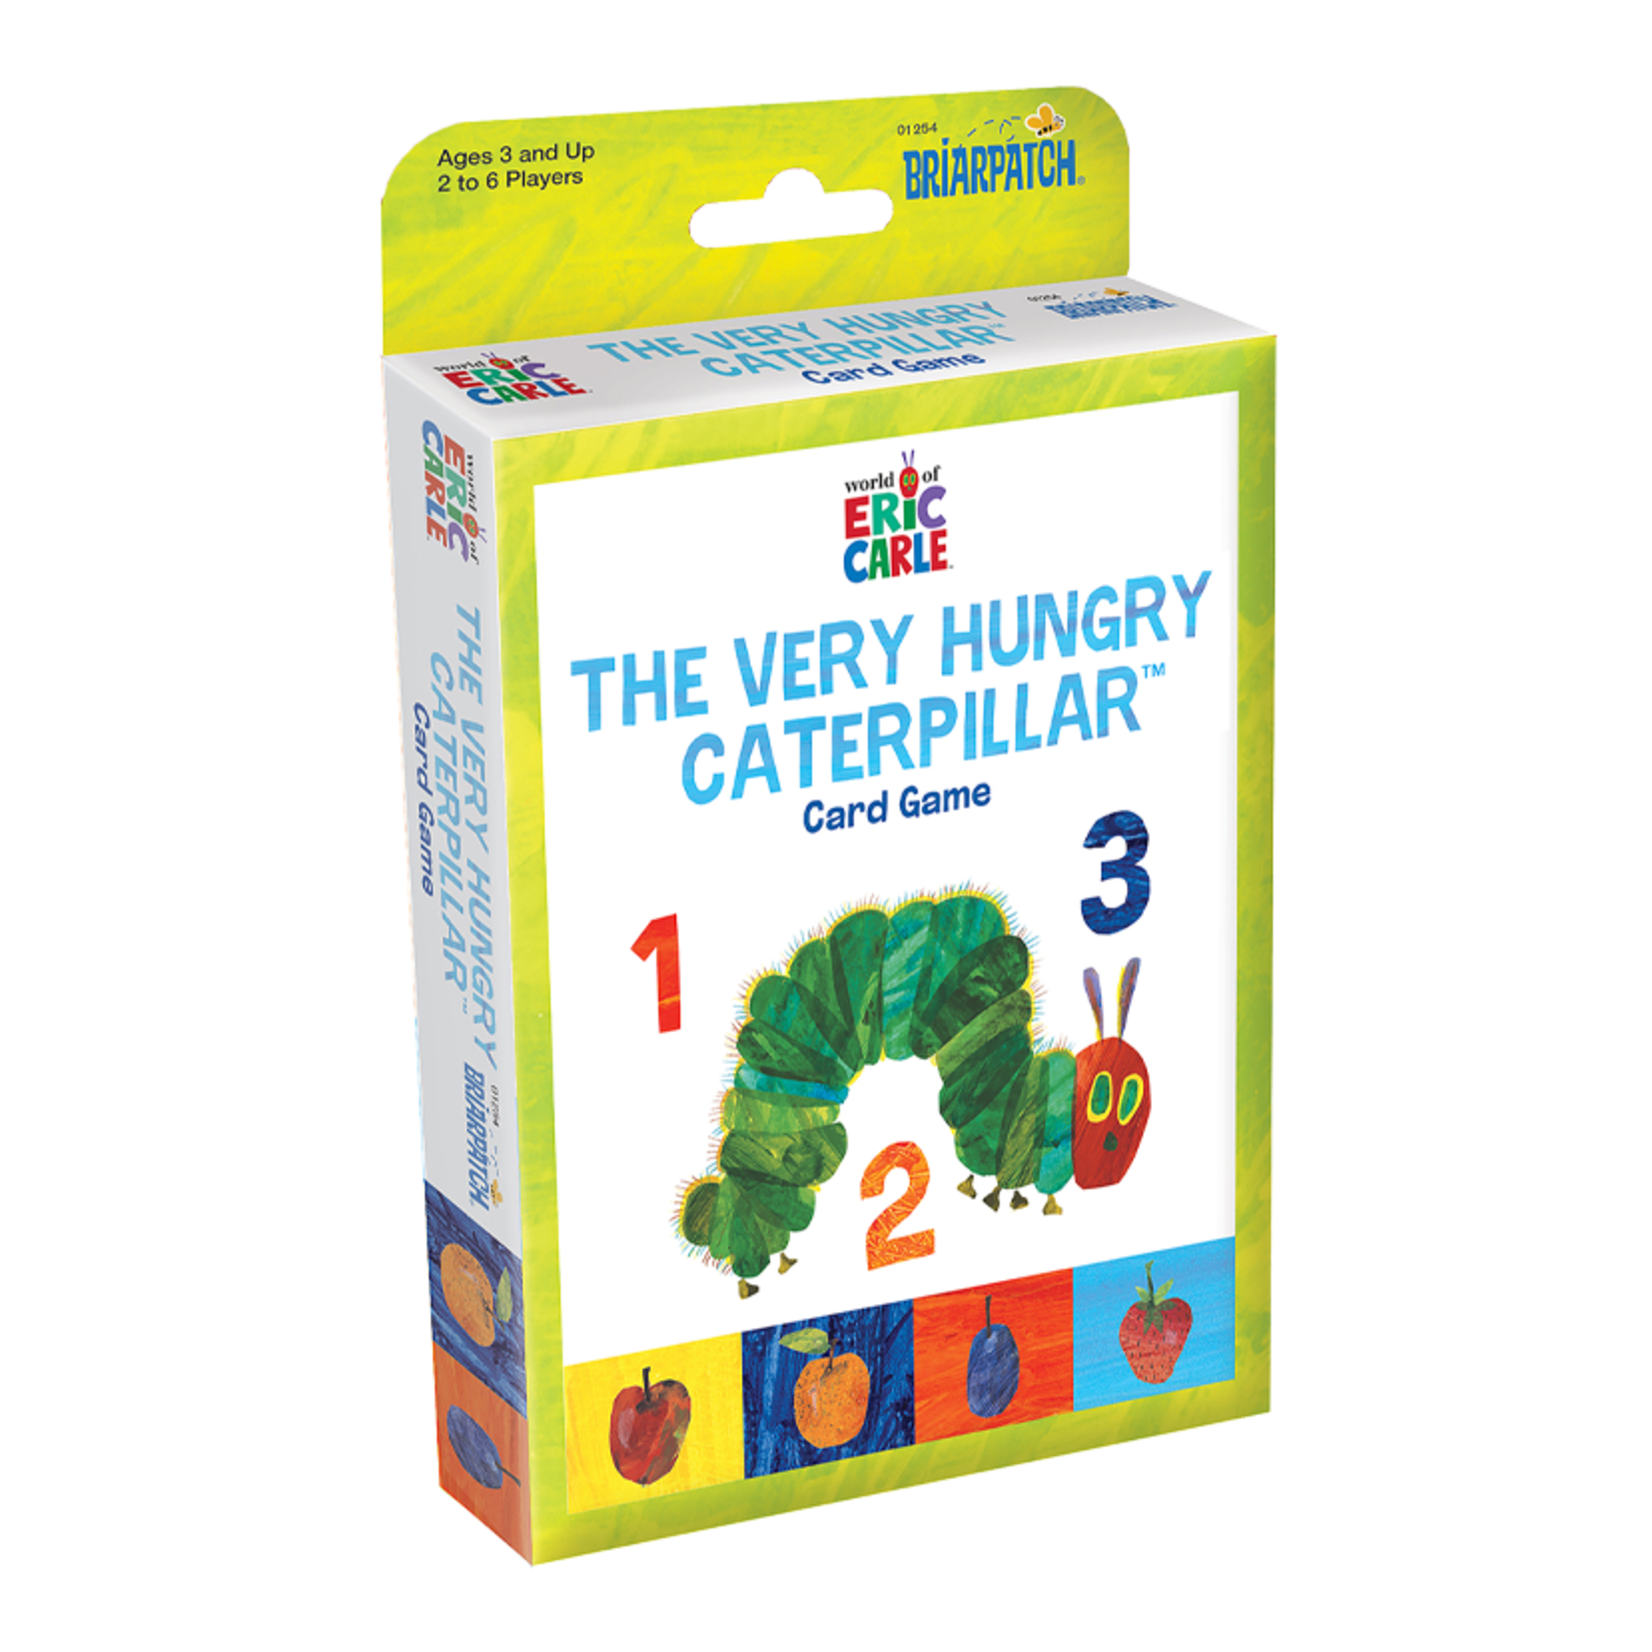 Briarpatch Eric Carle: The Very Hungry Caterpillar Card Game